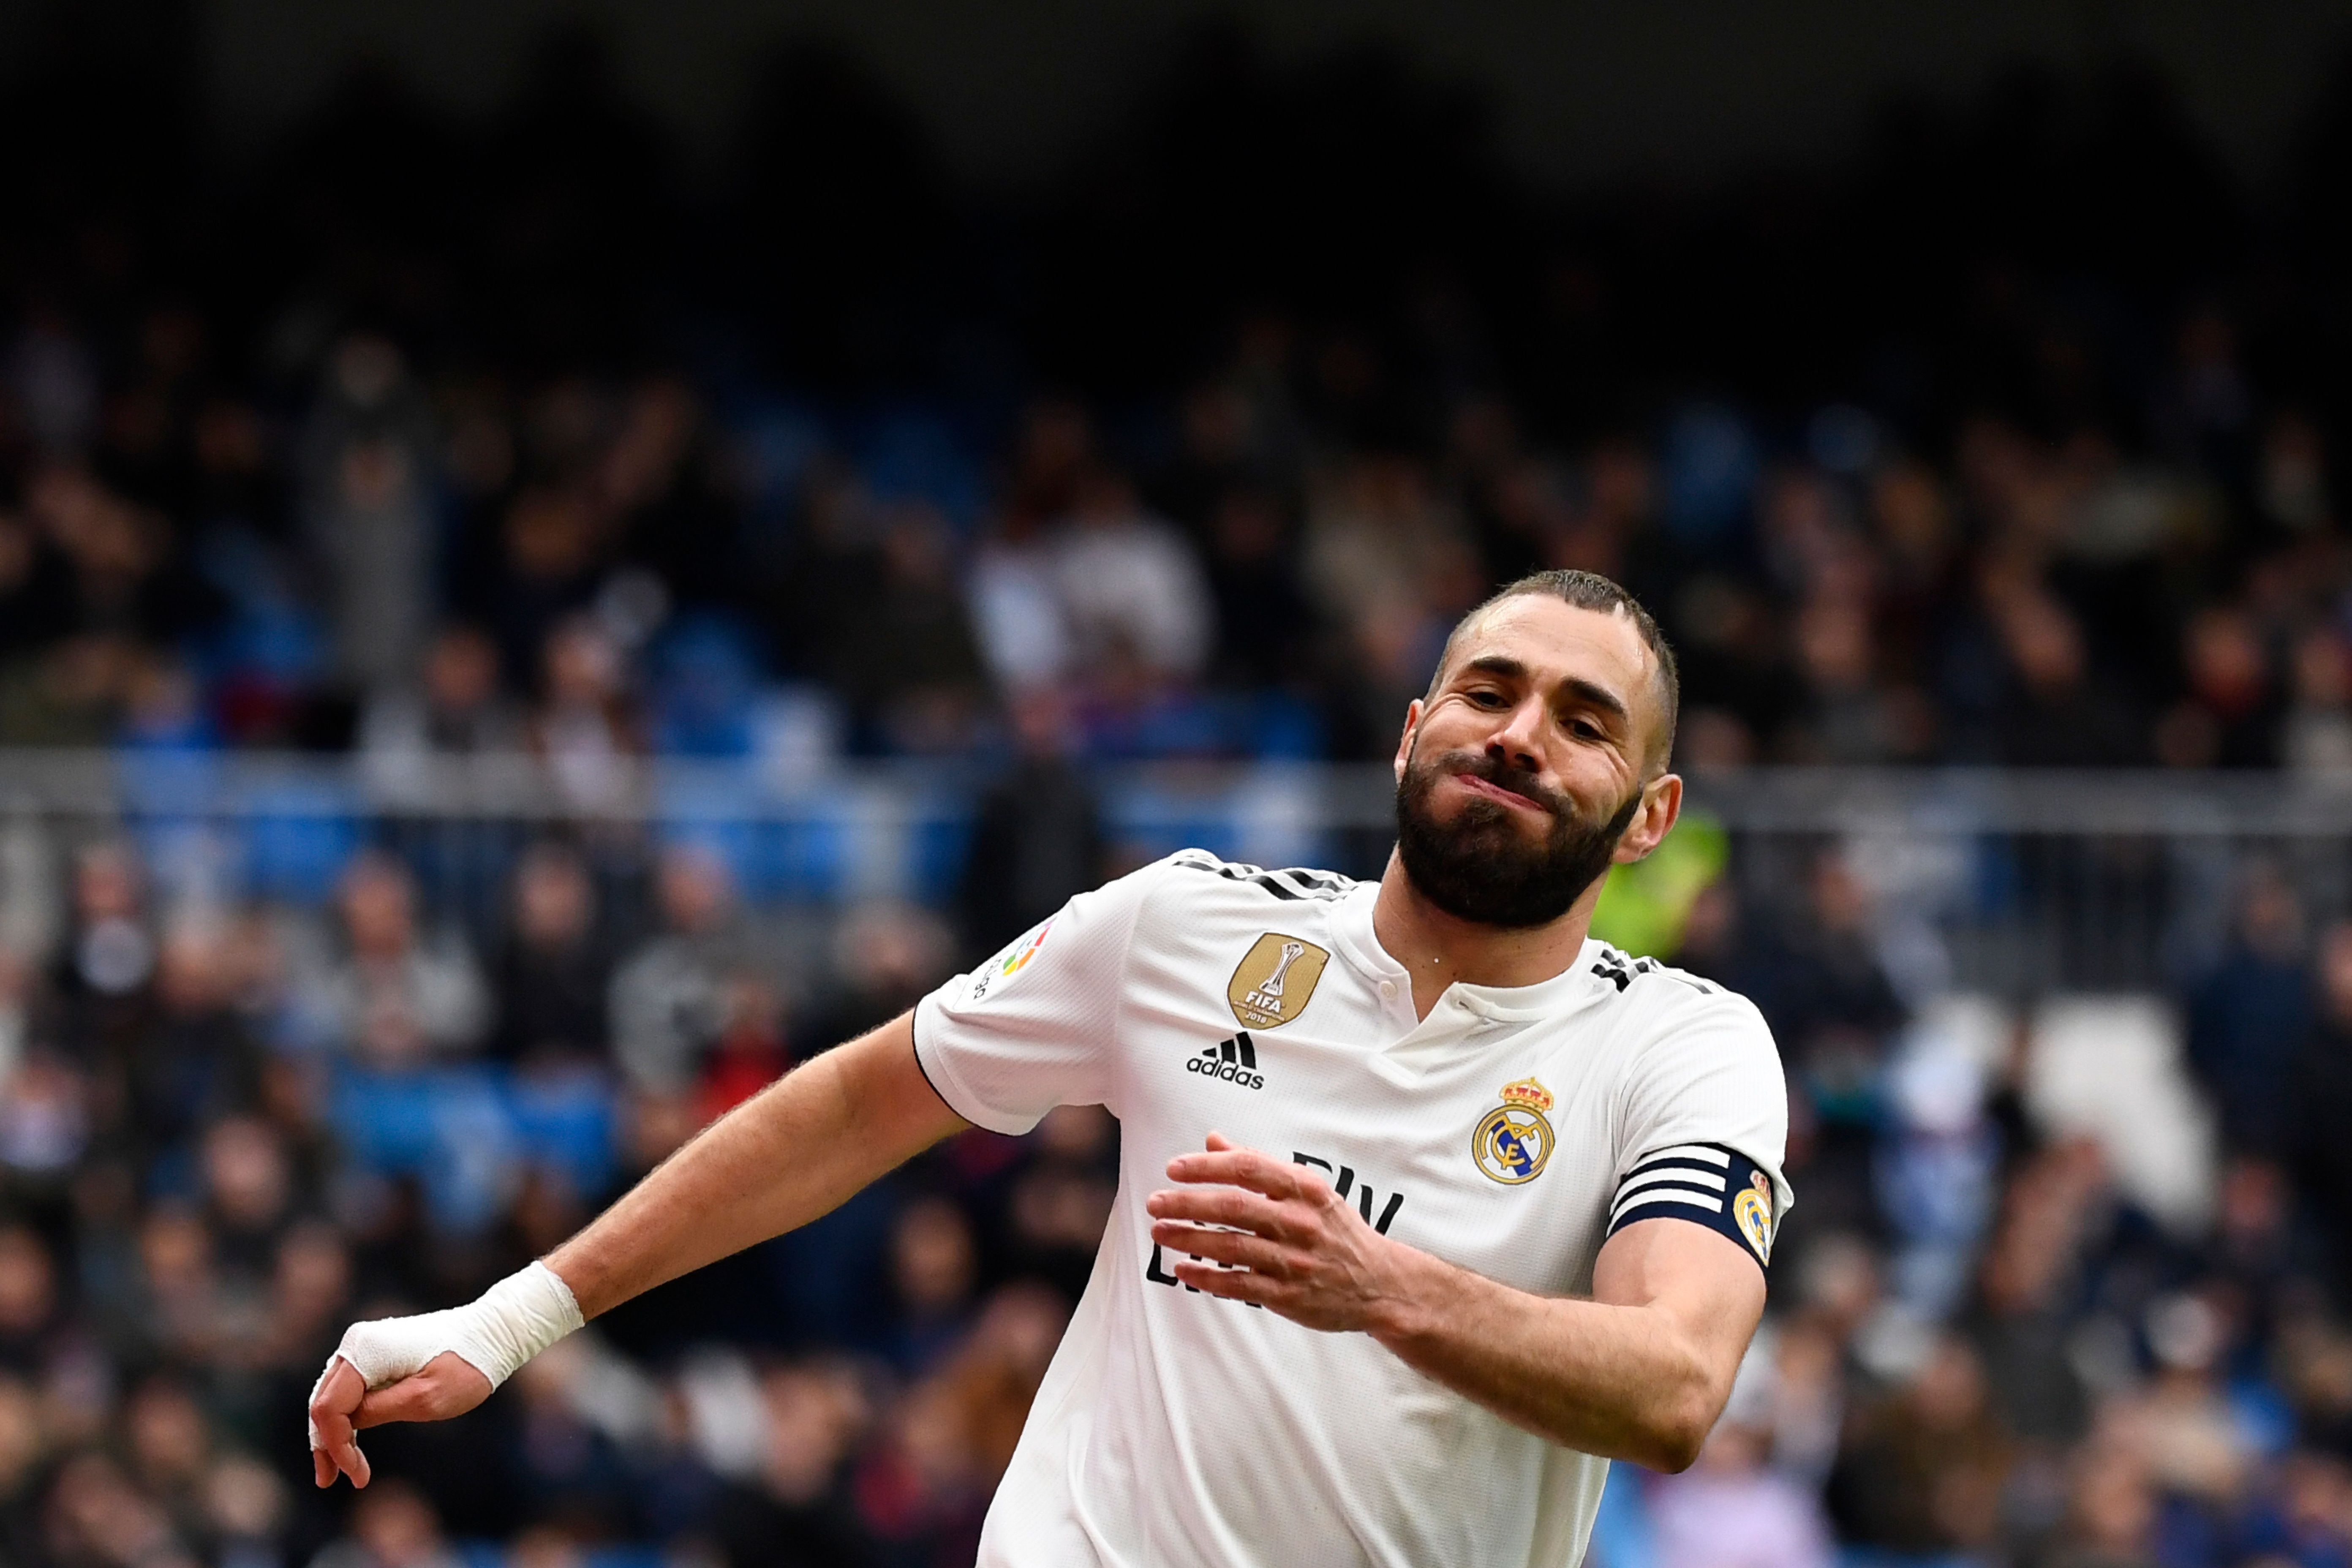 Real Madrid's French forward Karim Benzema reacts during the Spanish league football match between Real Madrid CF and SD Eibar at the Santiago Bernabeu stadium in Madrid on April 6, 2019. (Photo by GABRIEL BOUYS / AFP)        (Photo credit should read GABRIEL BOUYS/AFP/Getty Images)